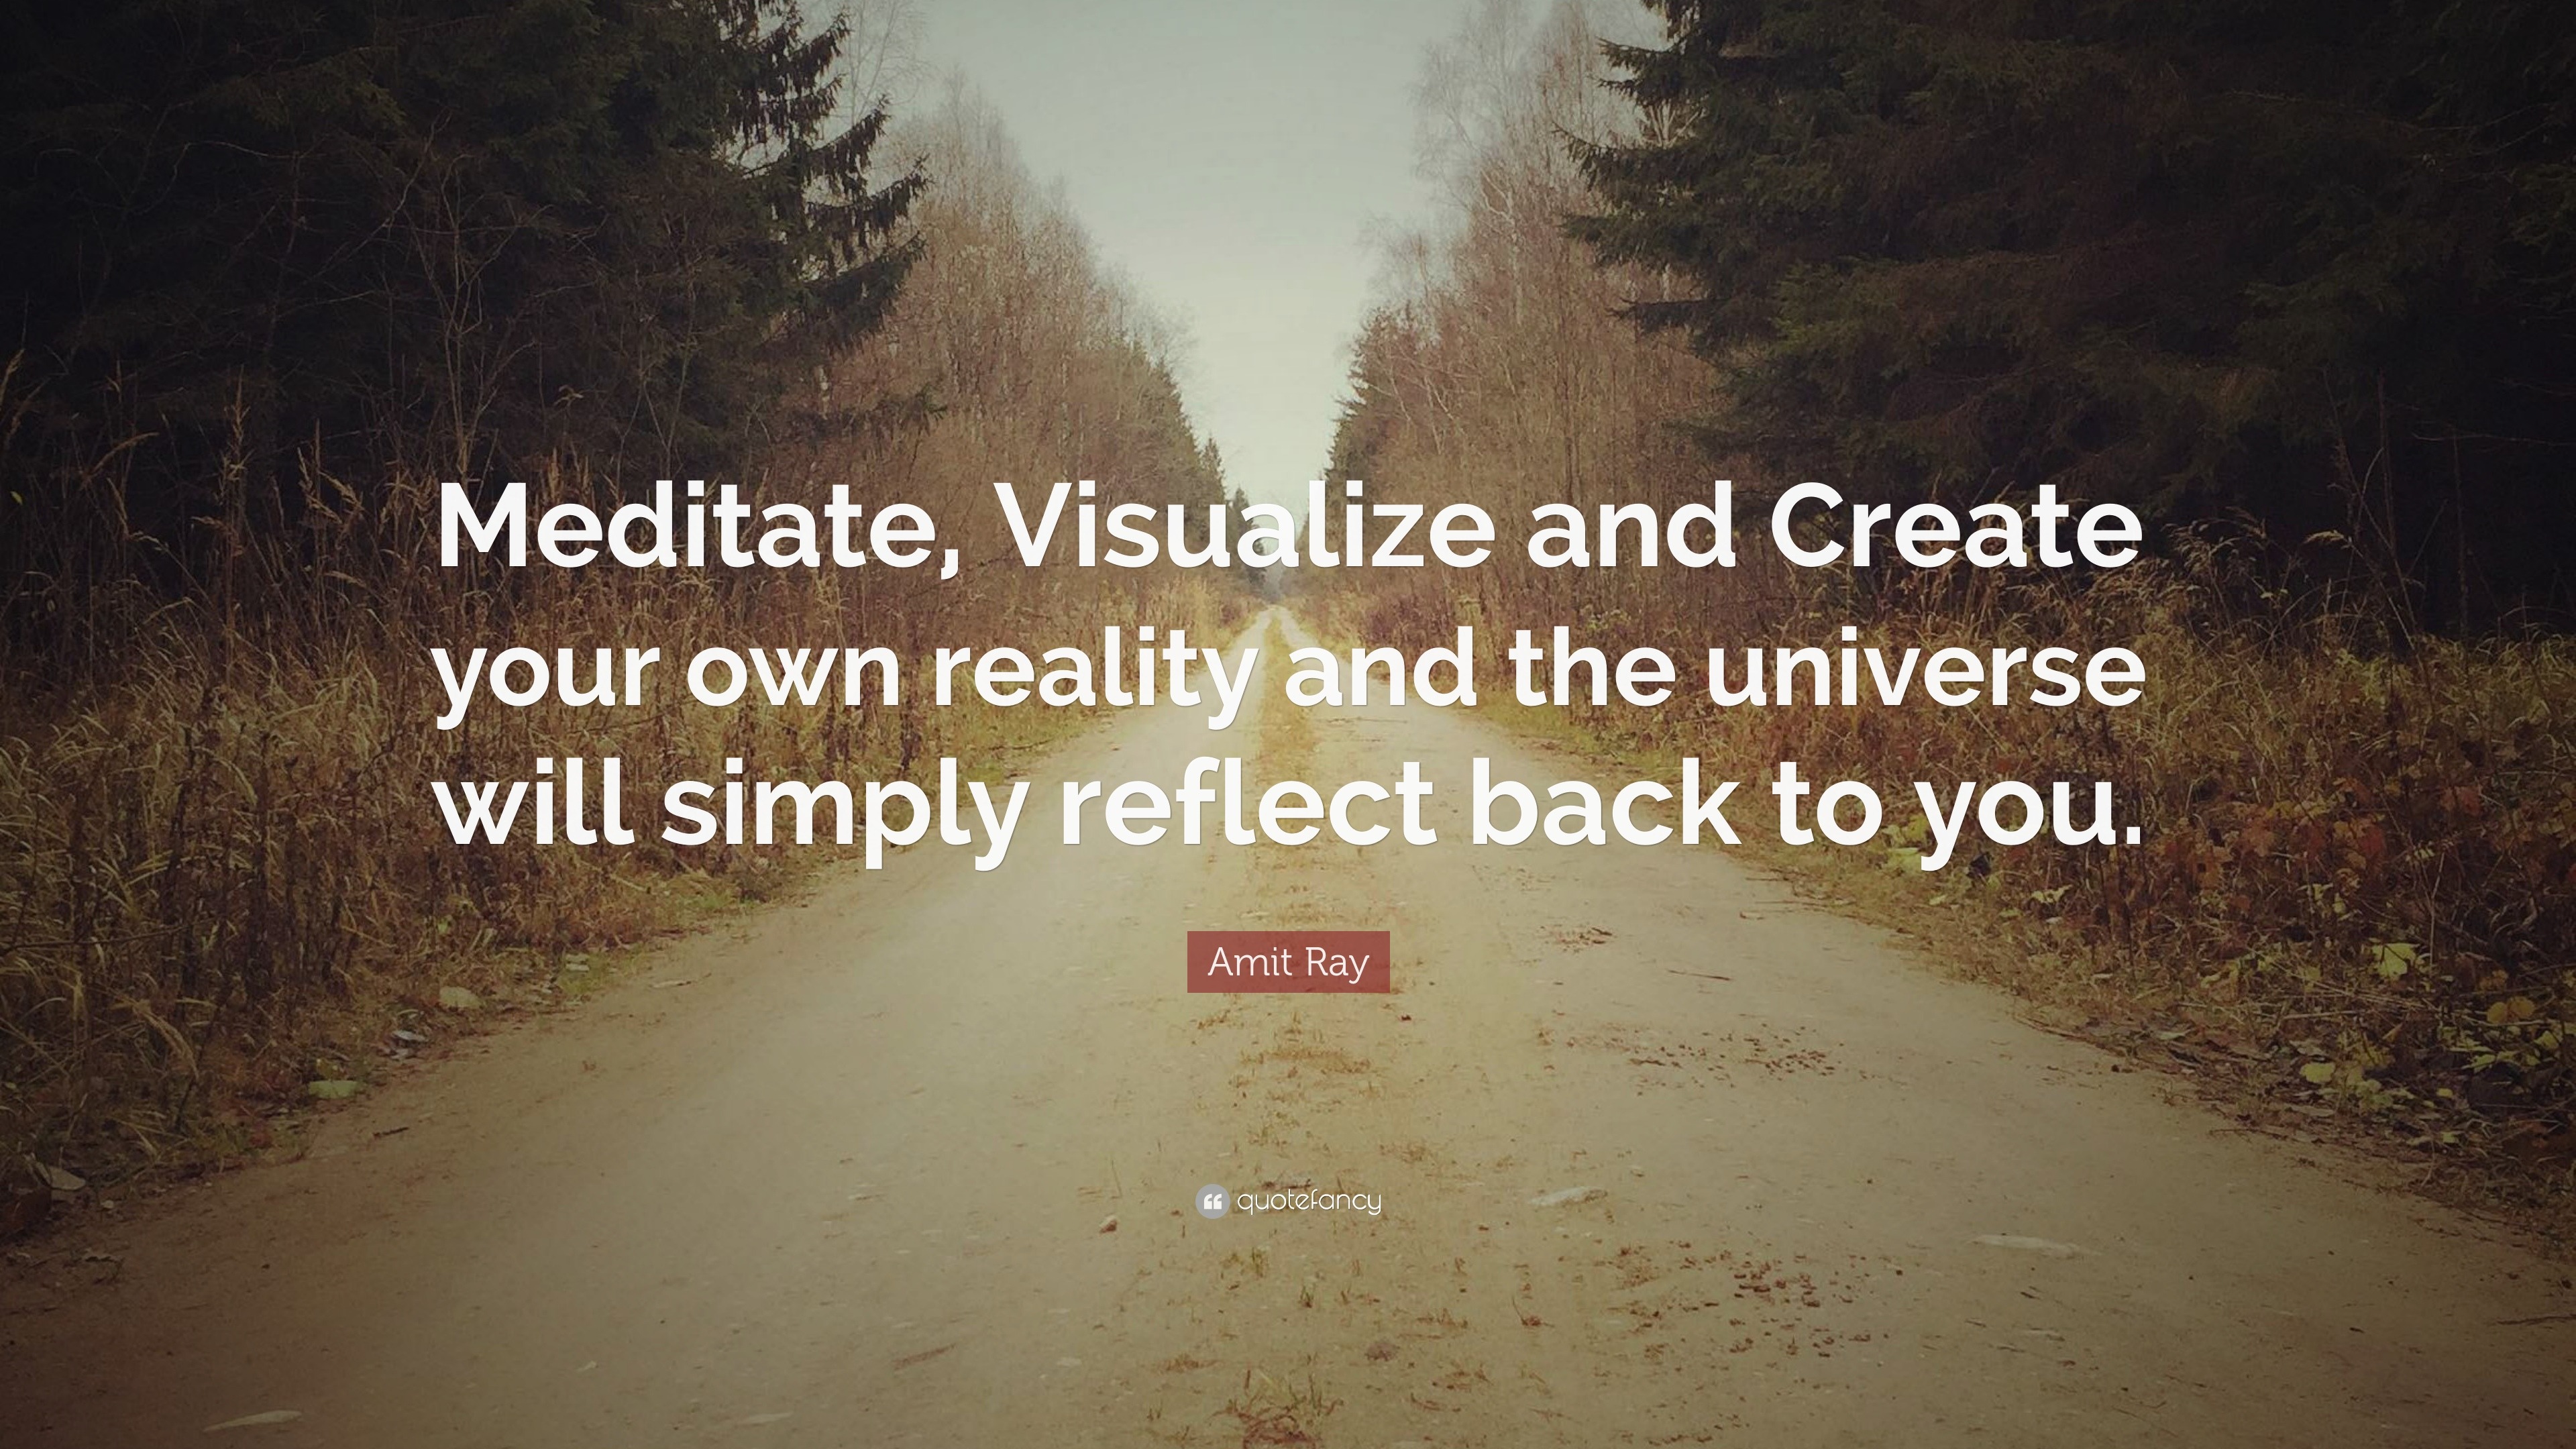 Amit Ray Quote “meditate Visualize And Create Your Own Reality And The Universe Will Simply